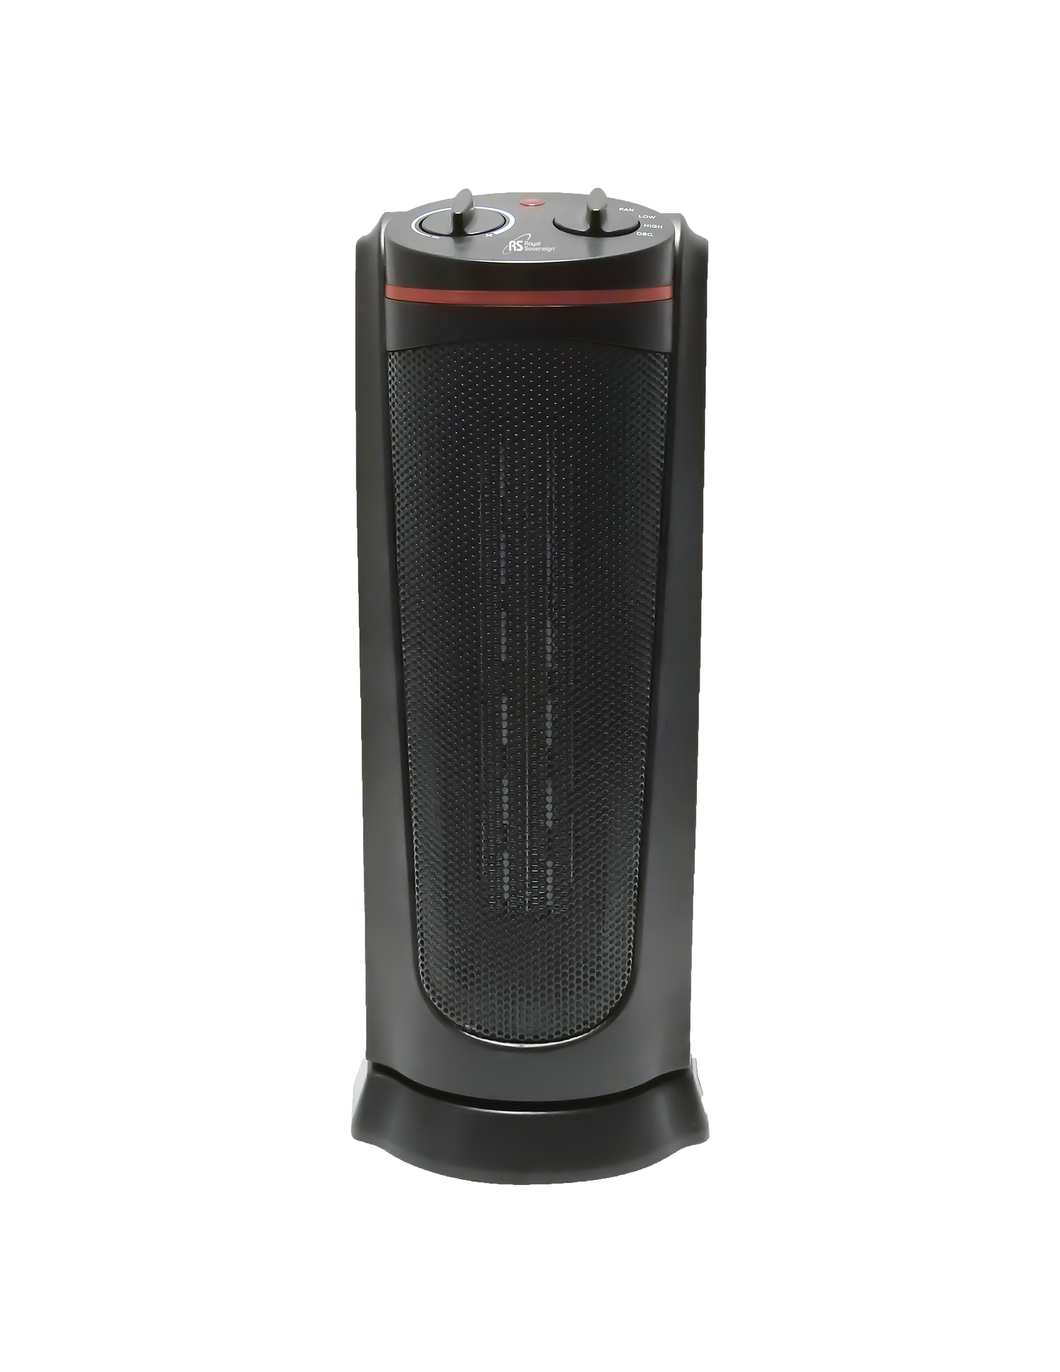 19” Compact Ceramic Tower Heater/ HCE-190